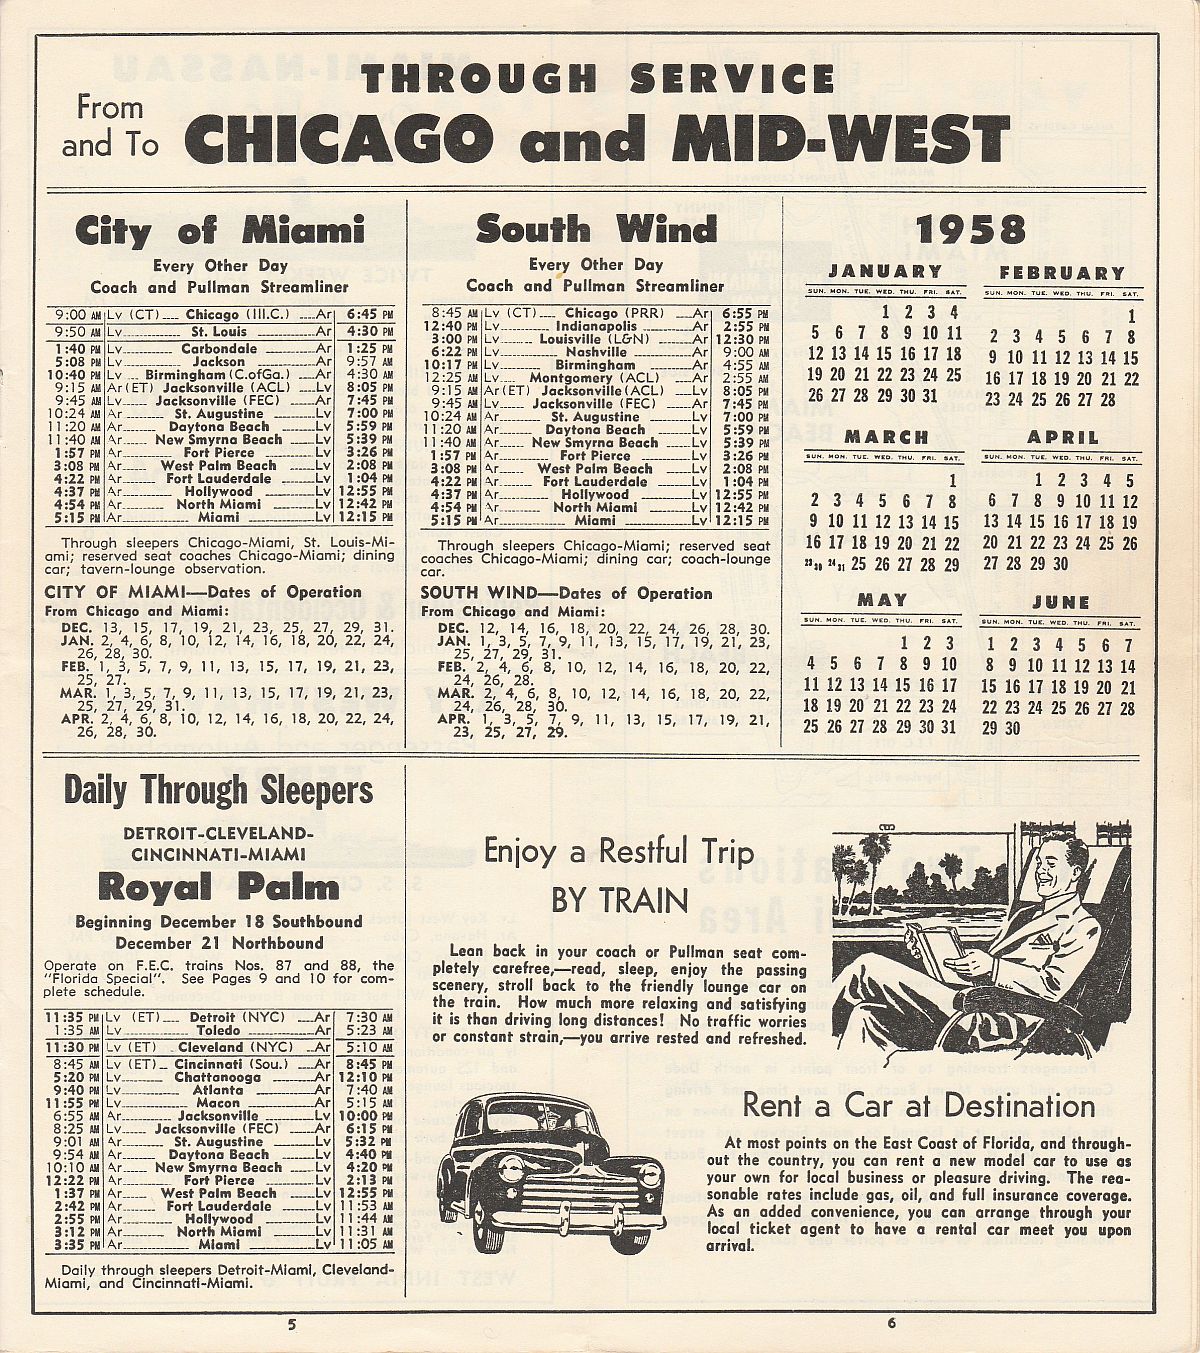 Florida East Coast Railway Dec. 12, 1957 timetable Pg. 5-6: Through service from & to Chicago and Mid-West Featuring City of Miami, South Wind & Royal Palm; Rent a car